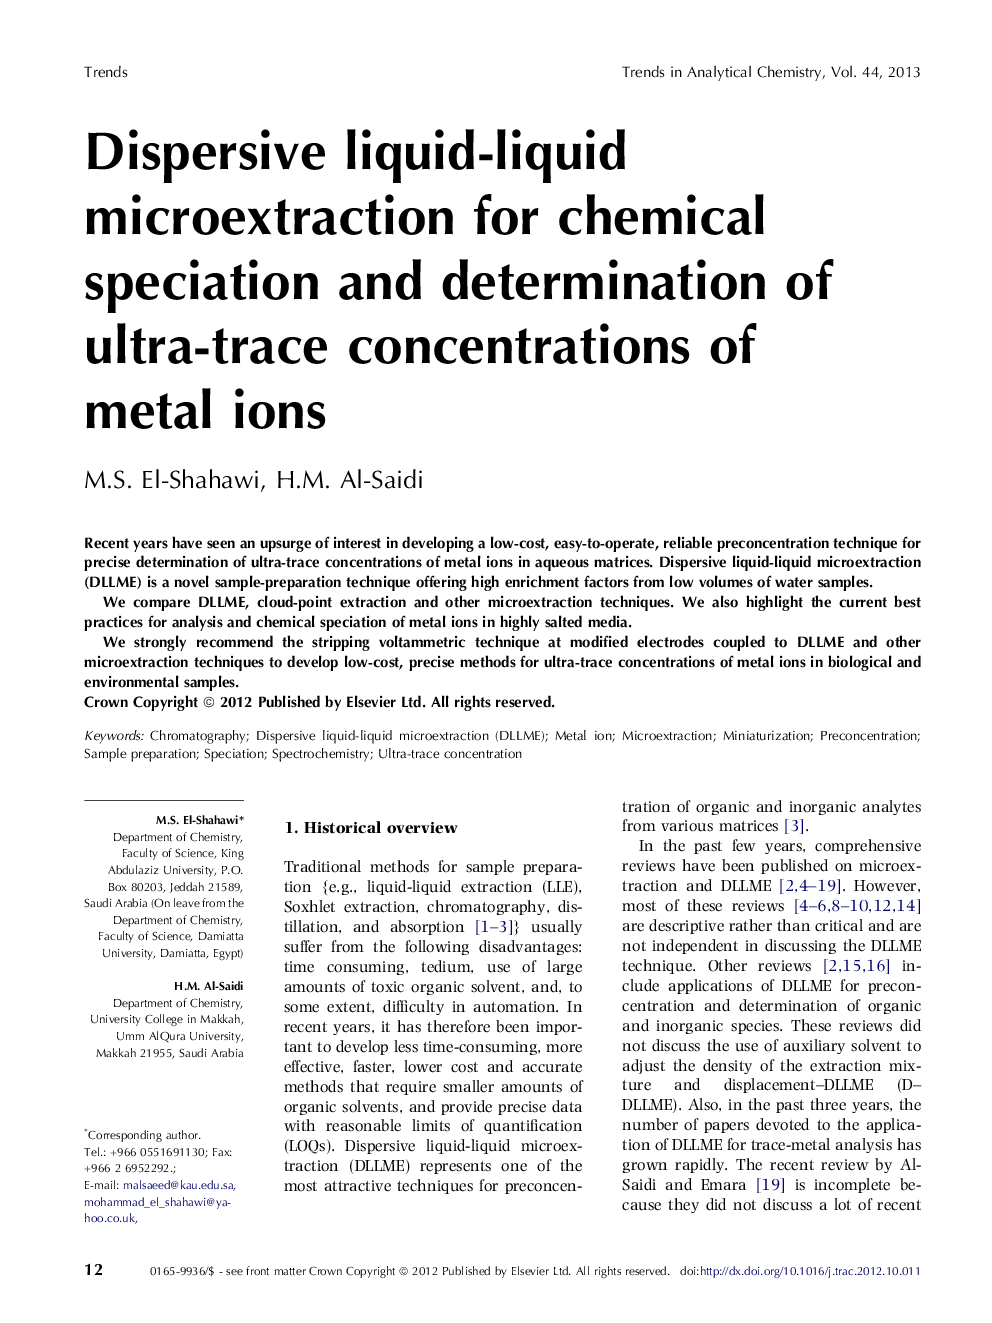 Dispersive liquid-liquid microextraction for chemical speciation and determination of ultra-trace concentrations of metal ions